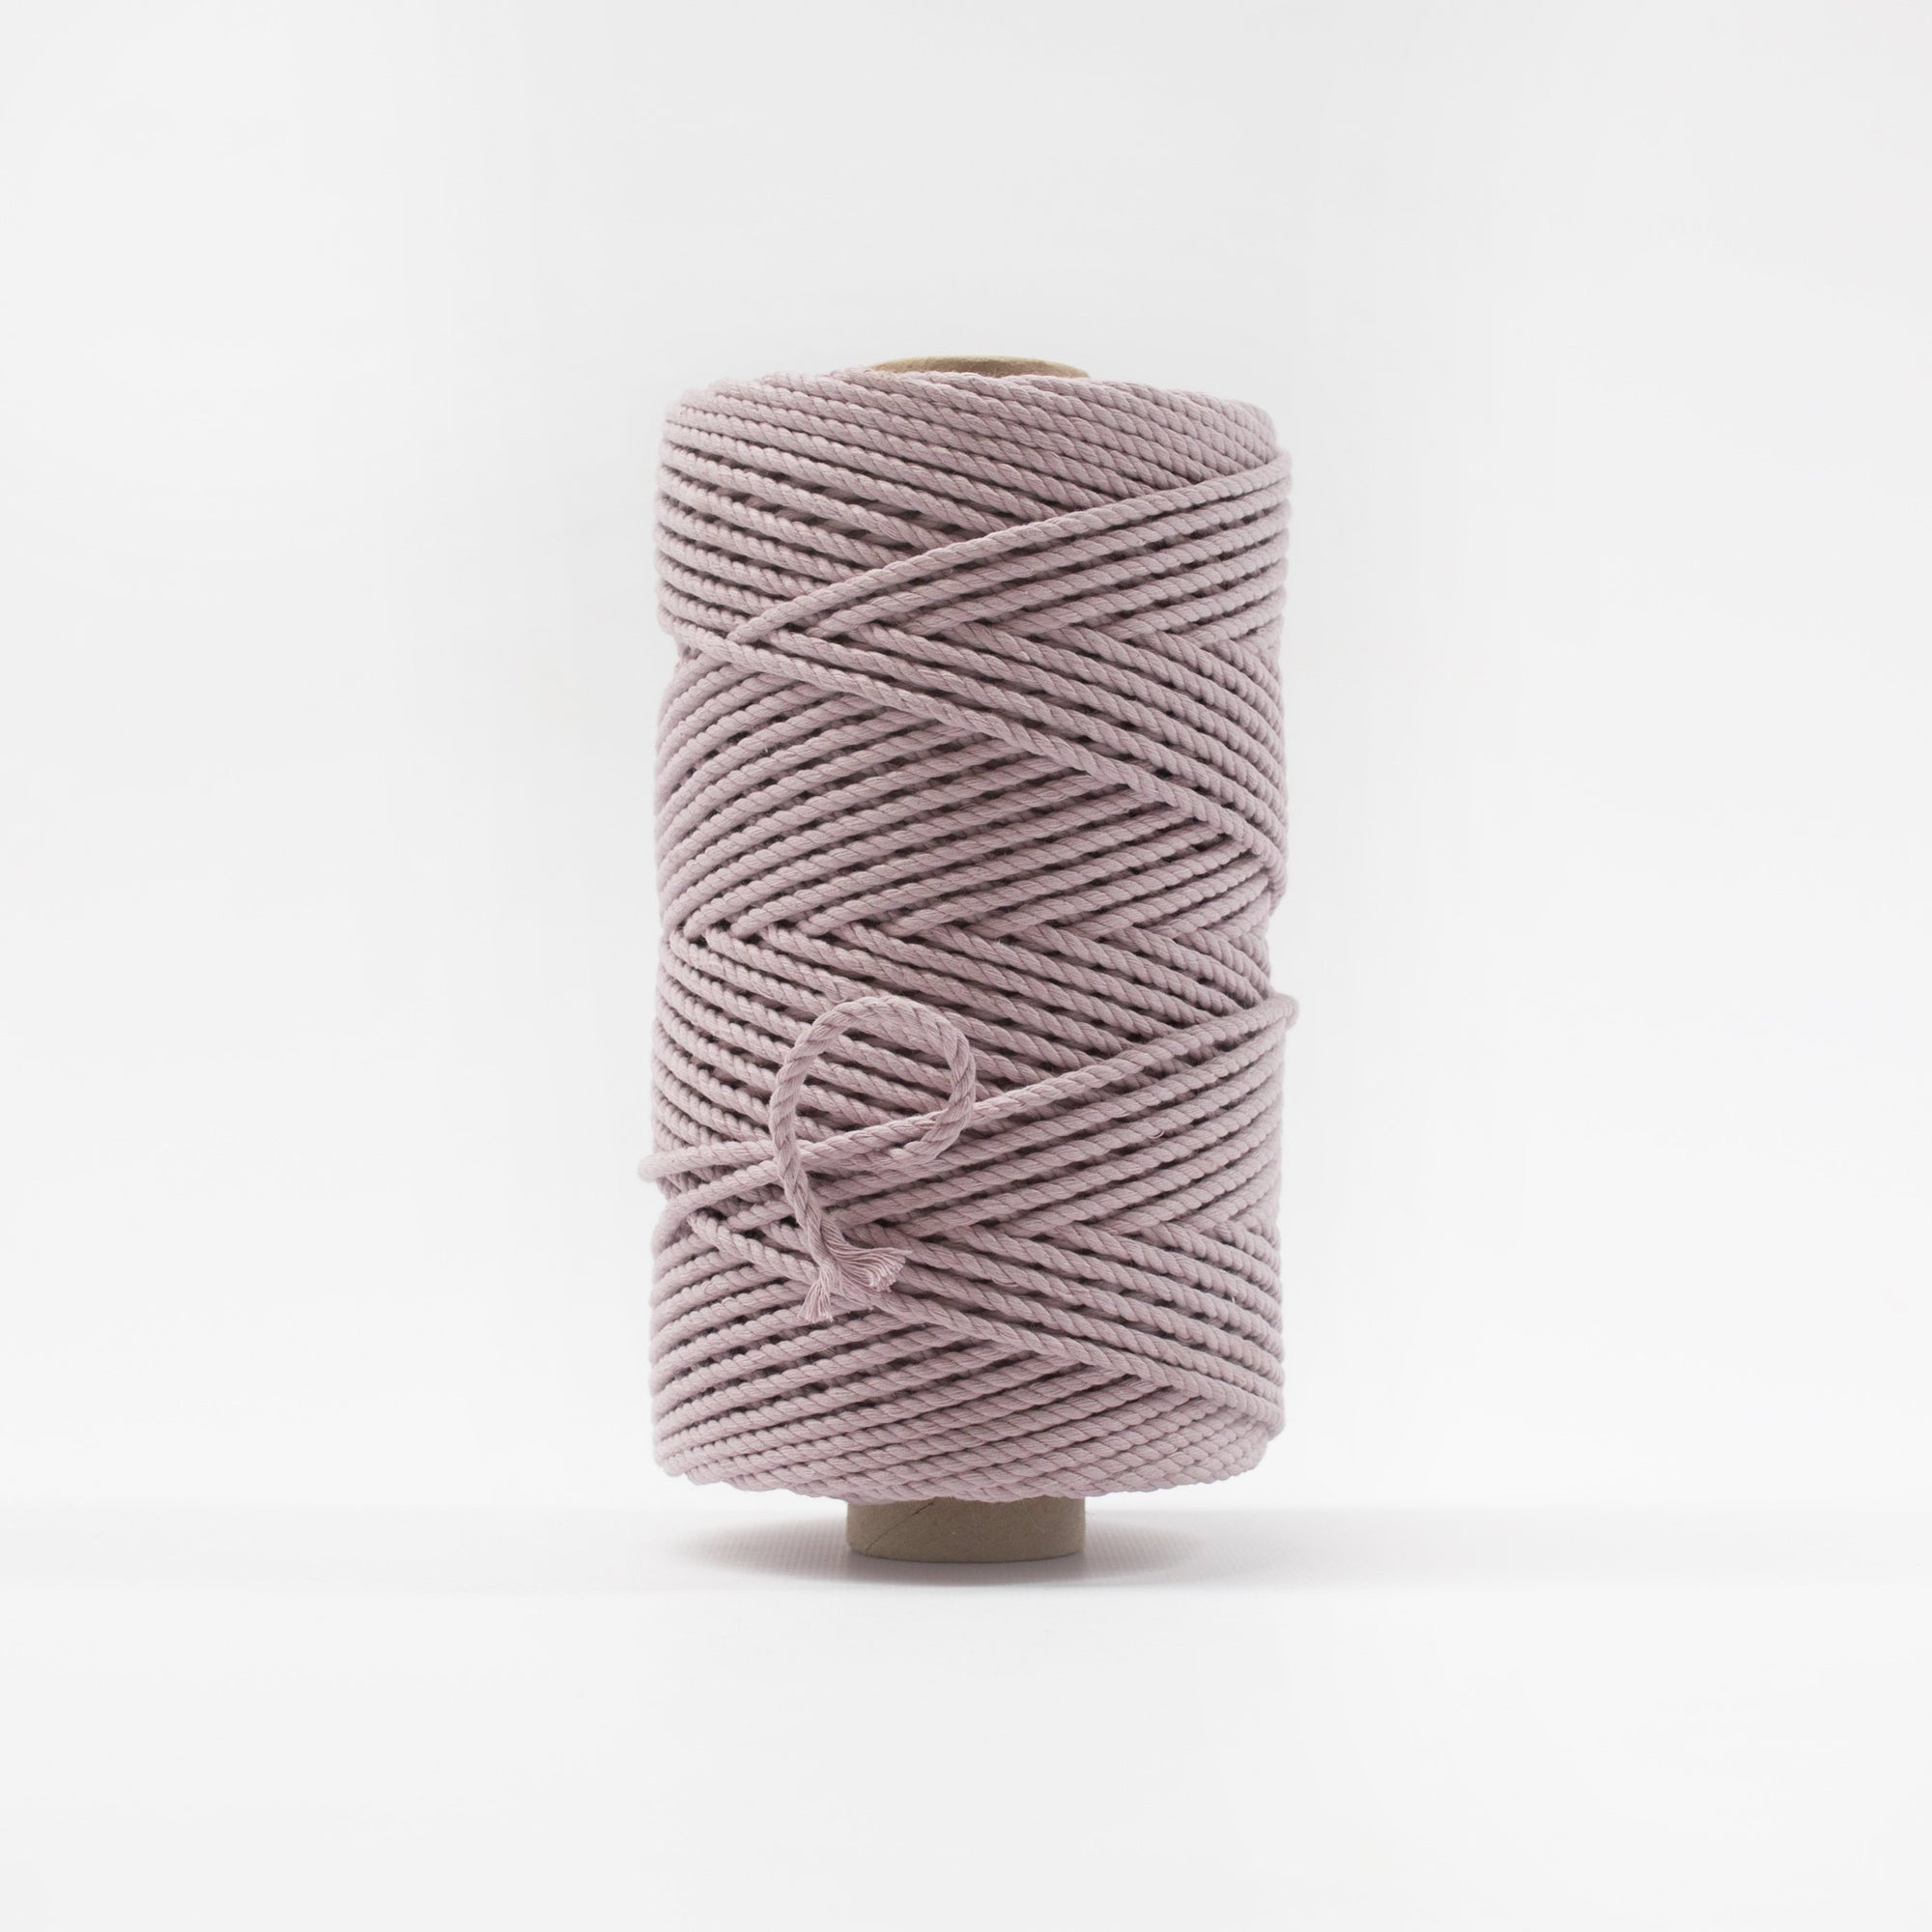 Mary Maker Studio Luxe Colour Cotton 4mm 1KG Recycled Luxe Macrame Rope // Pearl macrame cotton macrame rope macrame workshop macrame patterns macrame